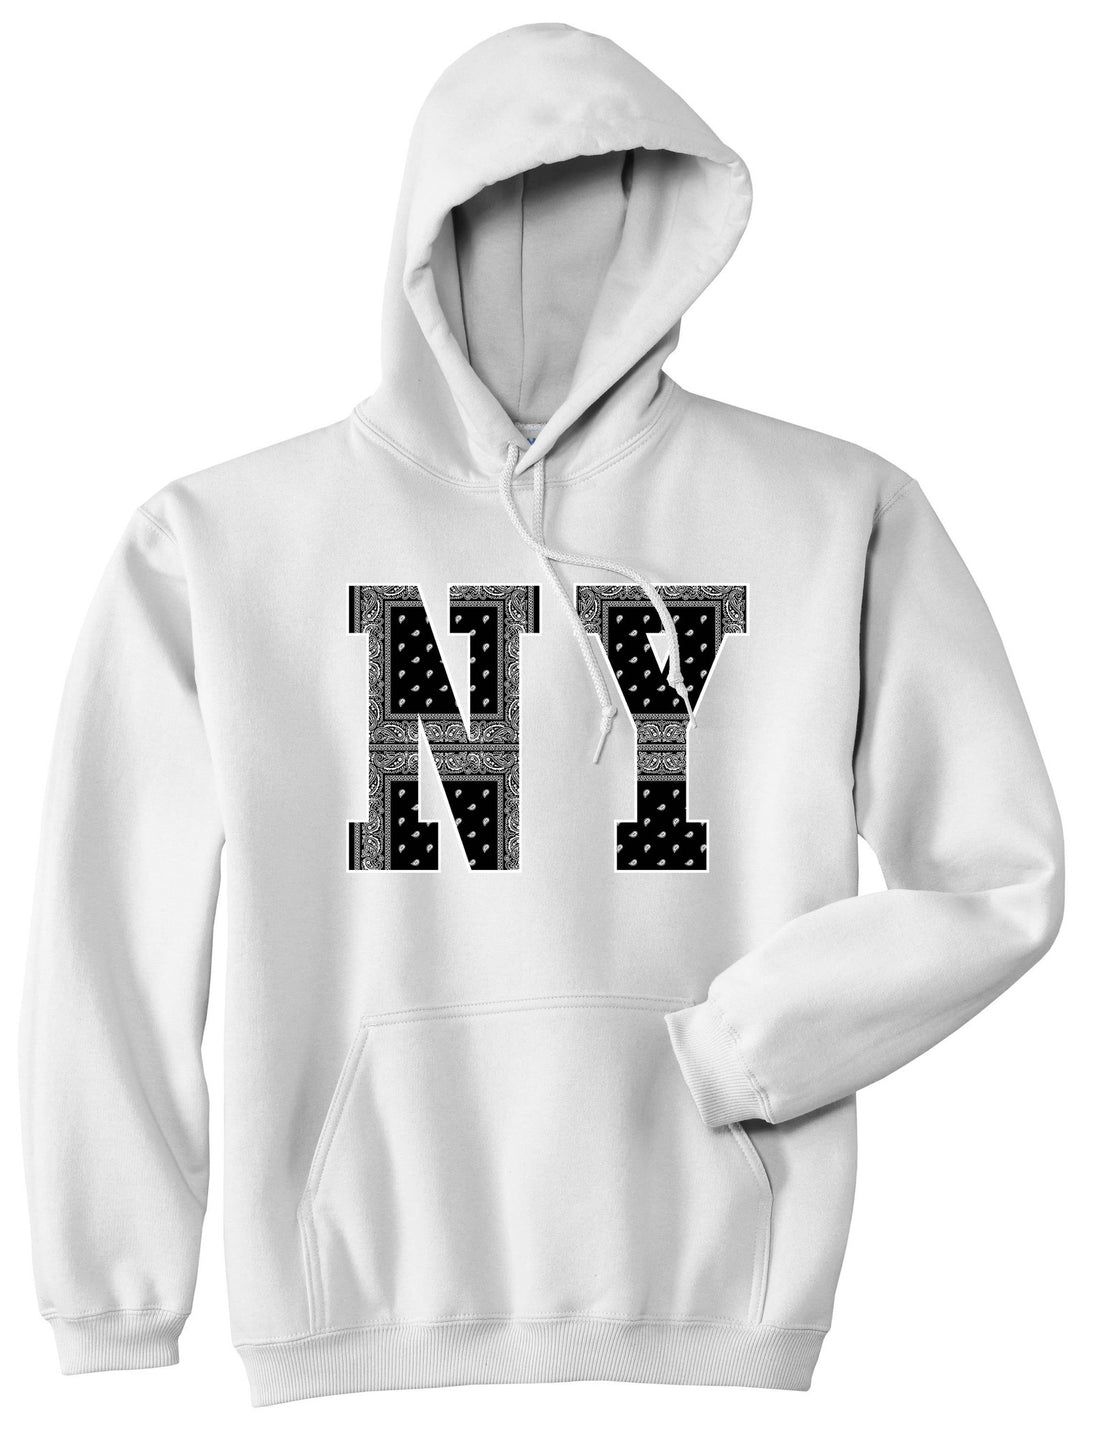 New York Bandana NYC Black by Kings Of NY Gang Flag Pullover Hoodie Hoody in White by Kings Of NY